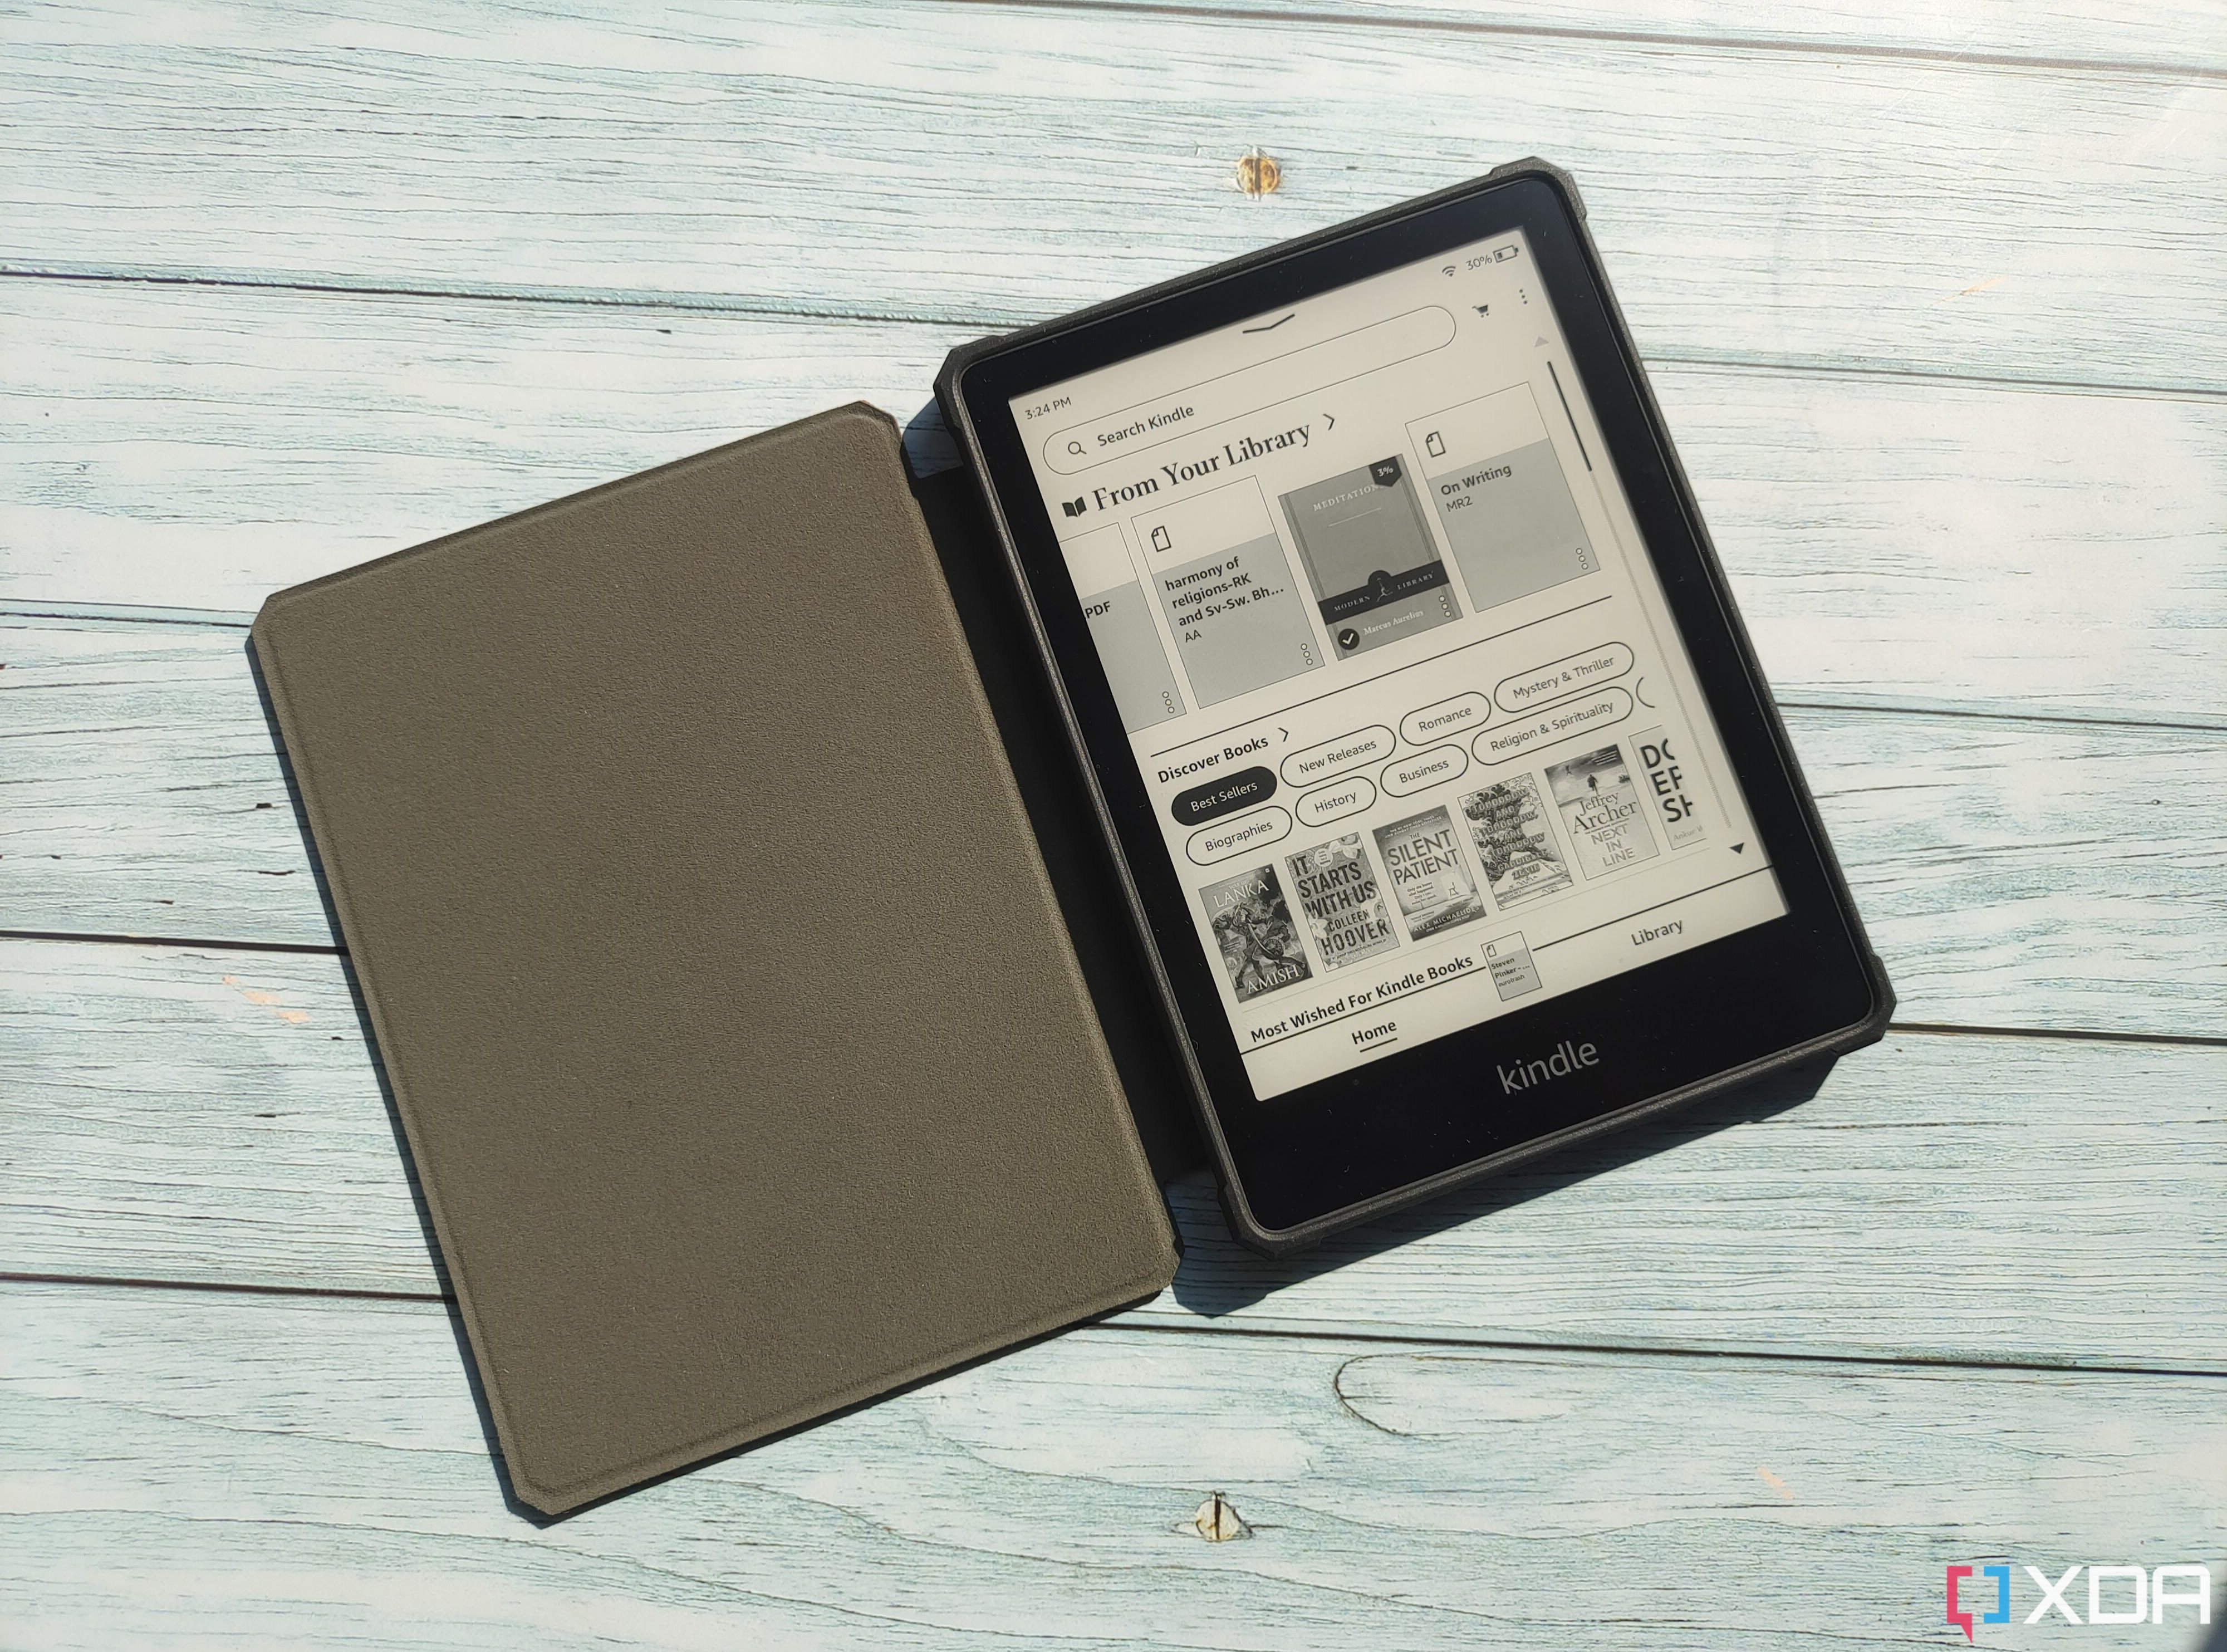 Kindle Paperwhite 2018 review: The e-book reader for the